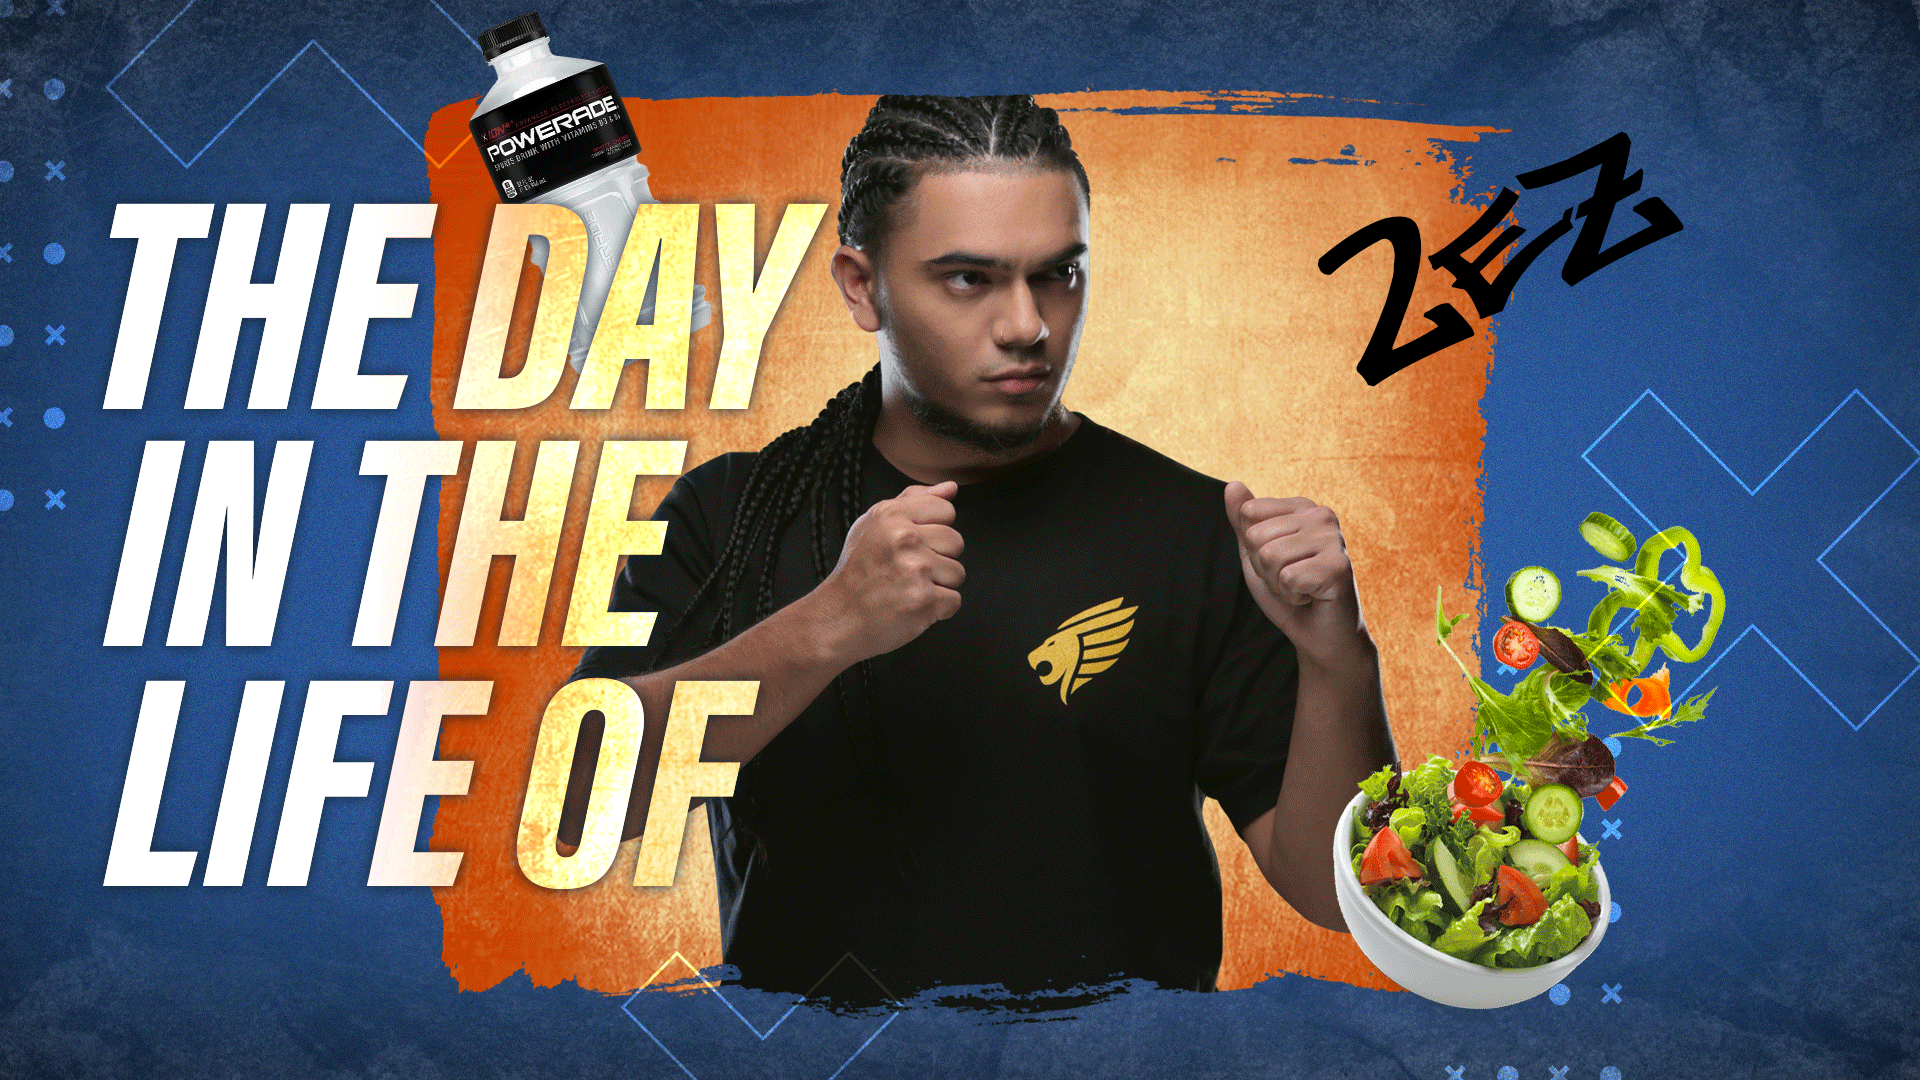 DashFight Presents: A Day in the Life of.... 2ez